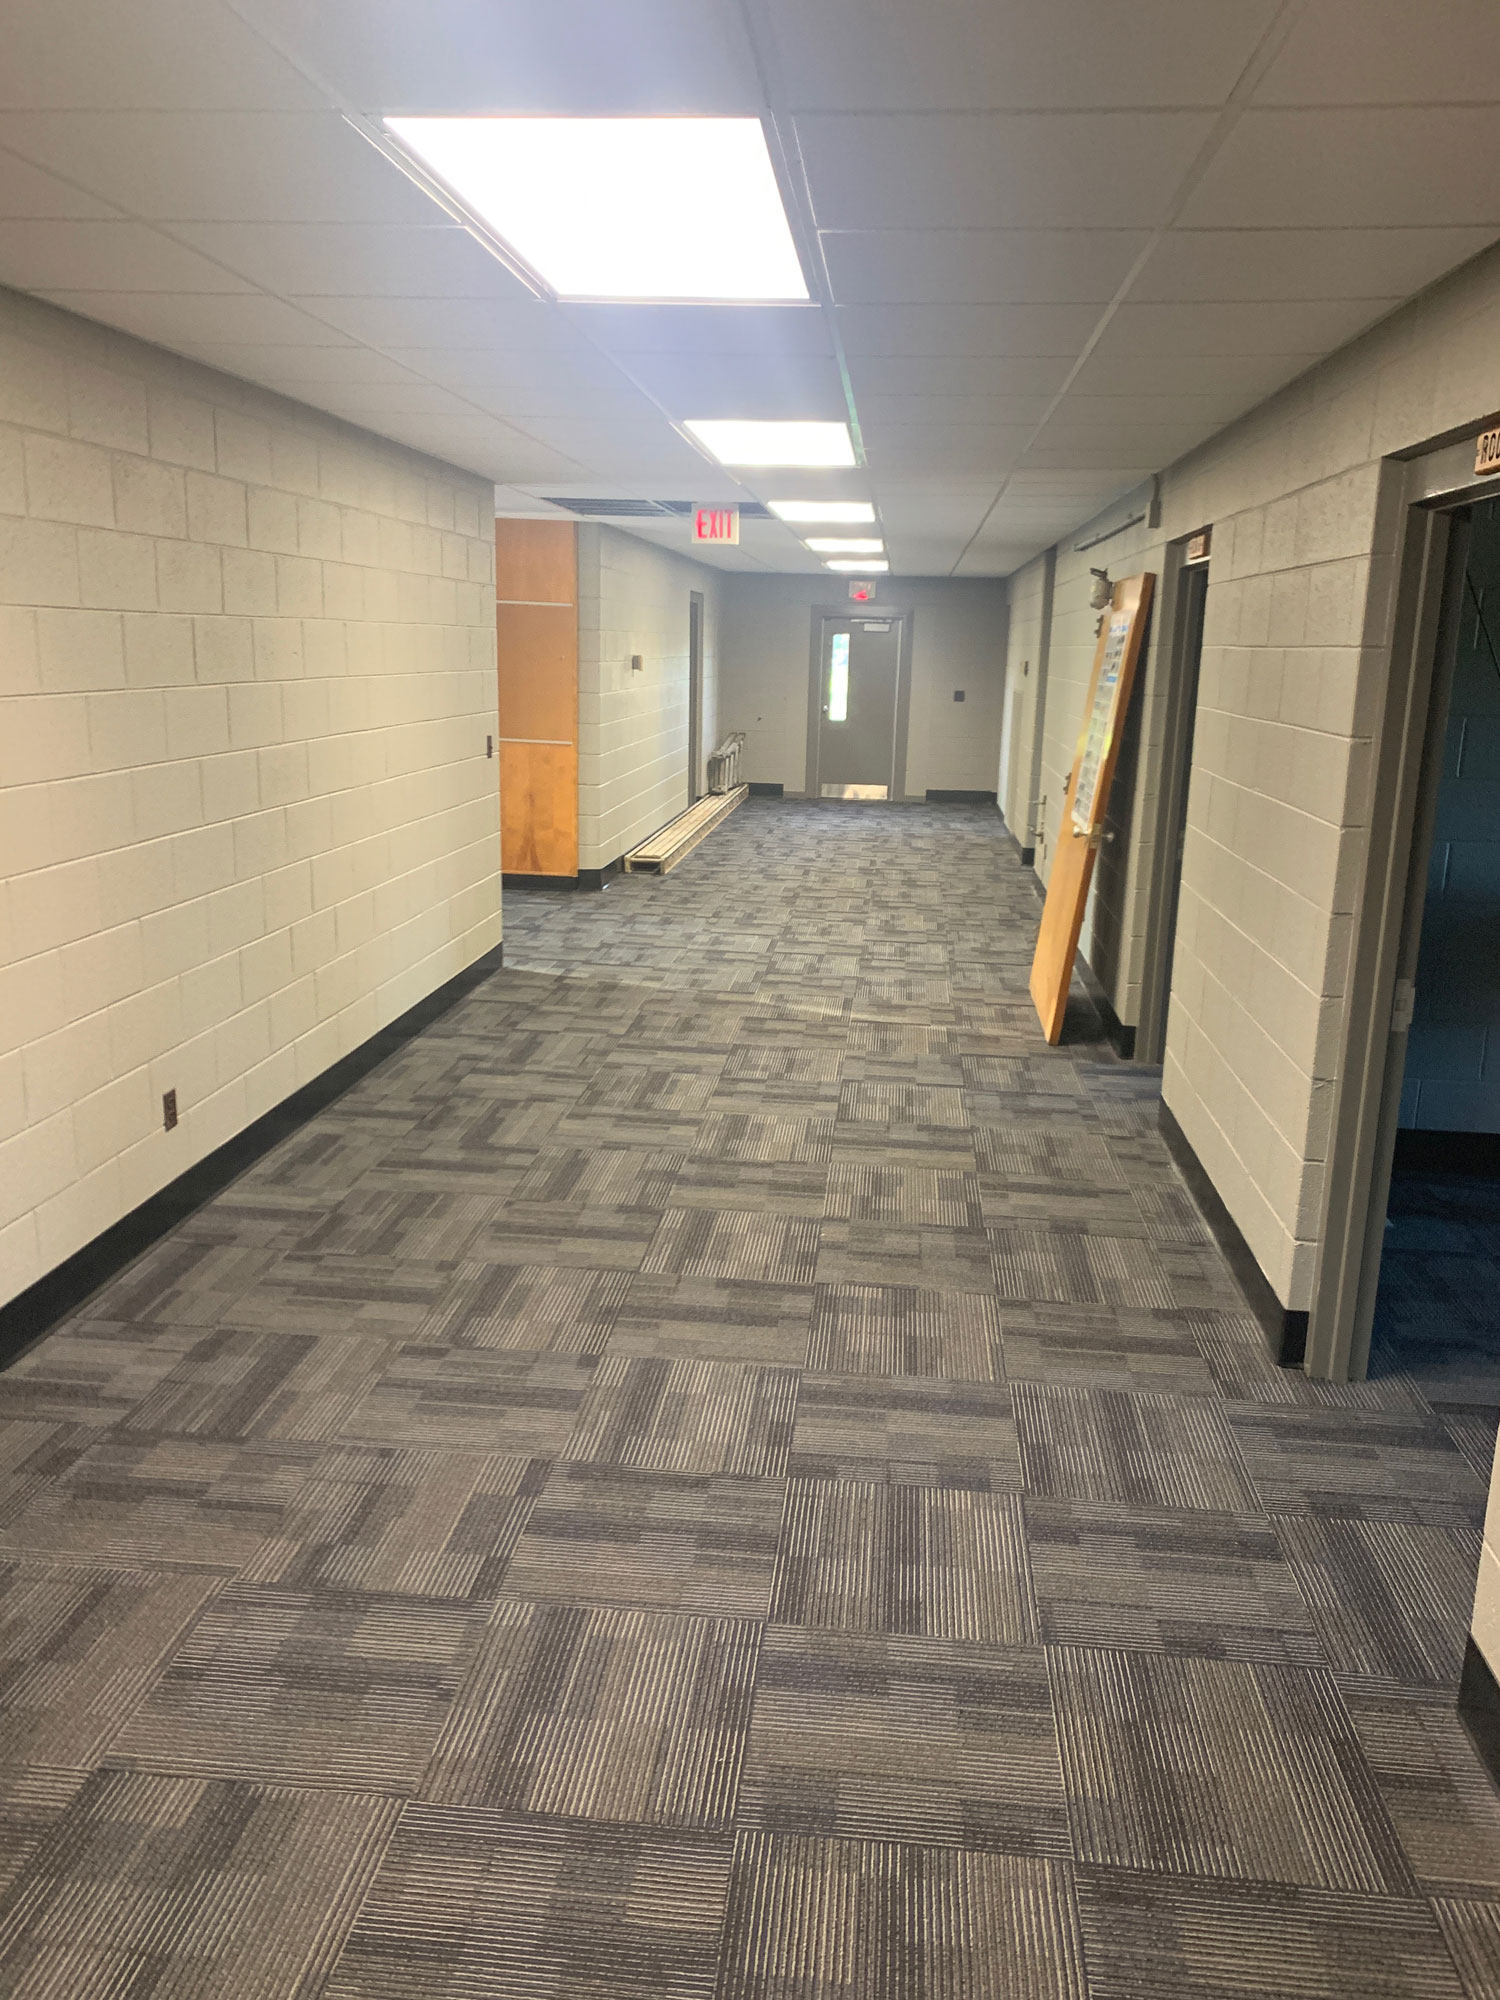 Painting and trim work on commercial property